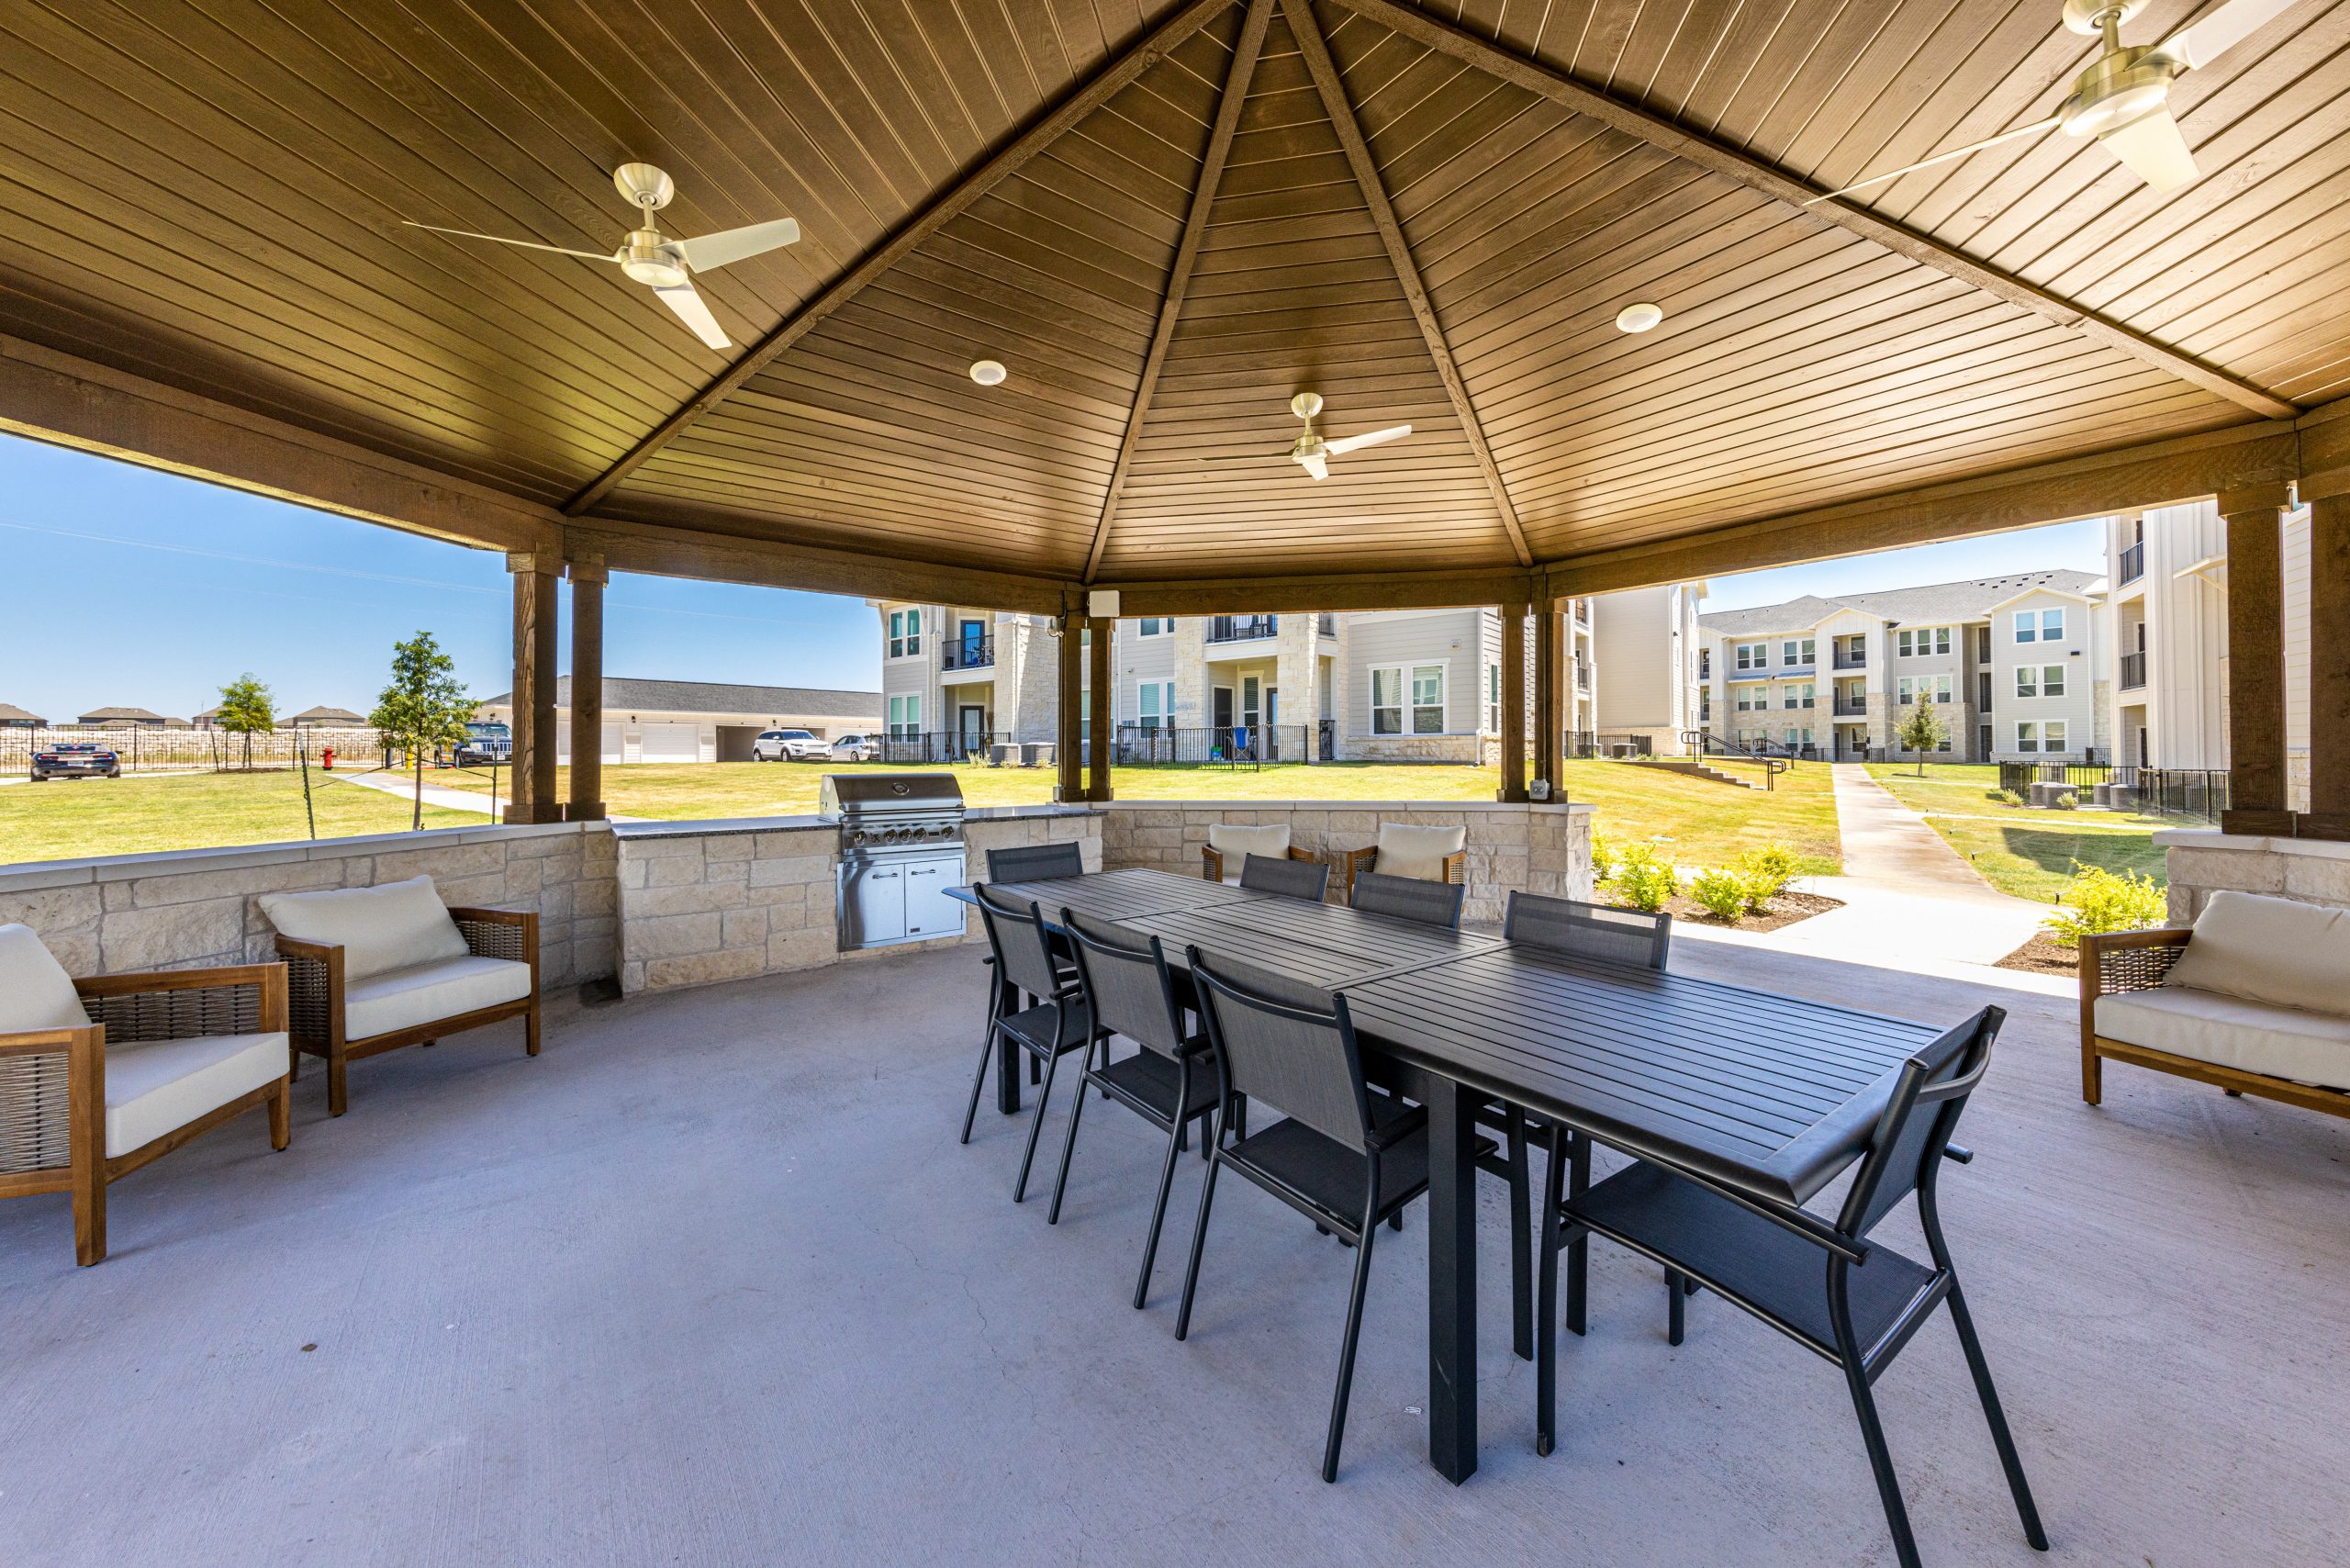 daytime view of the outdoor kitchen of a multi-family commercial property